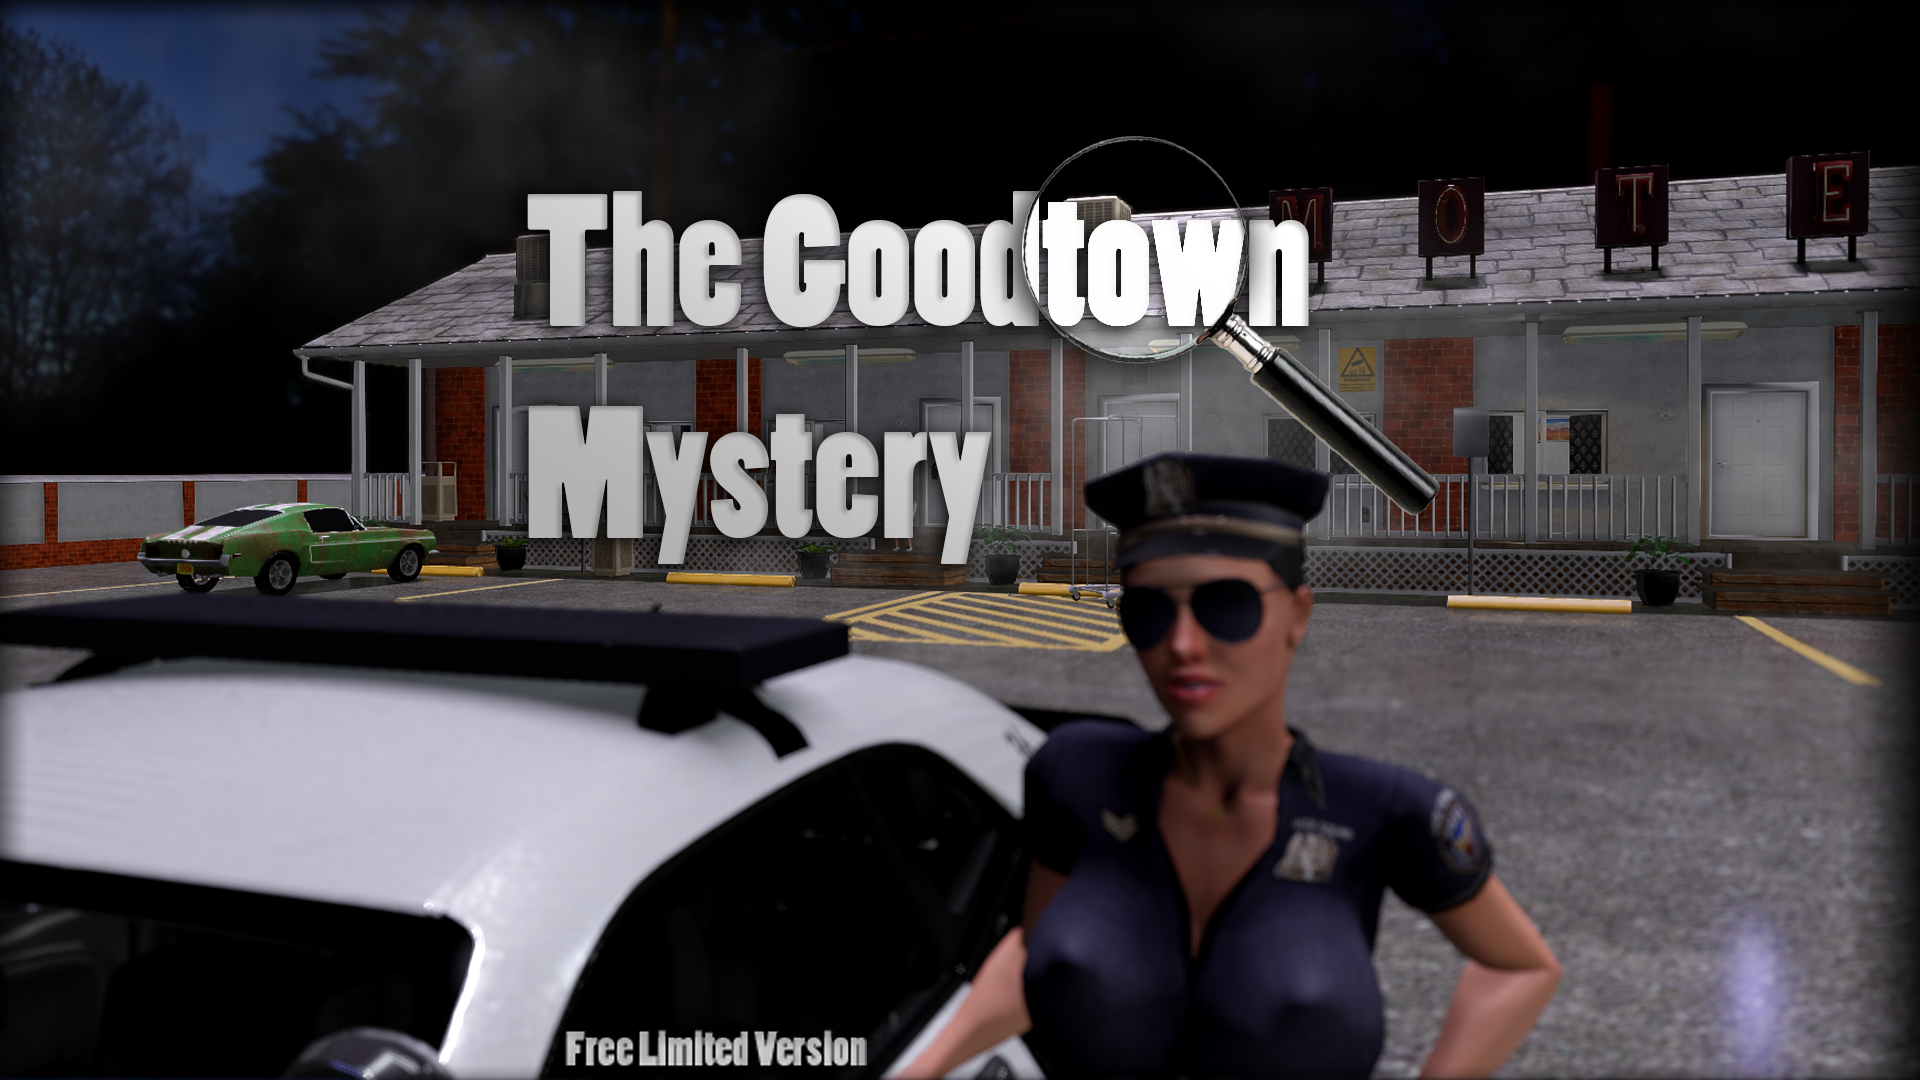 The Goodtown Mystery - Free